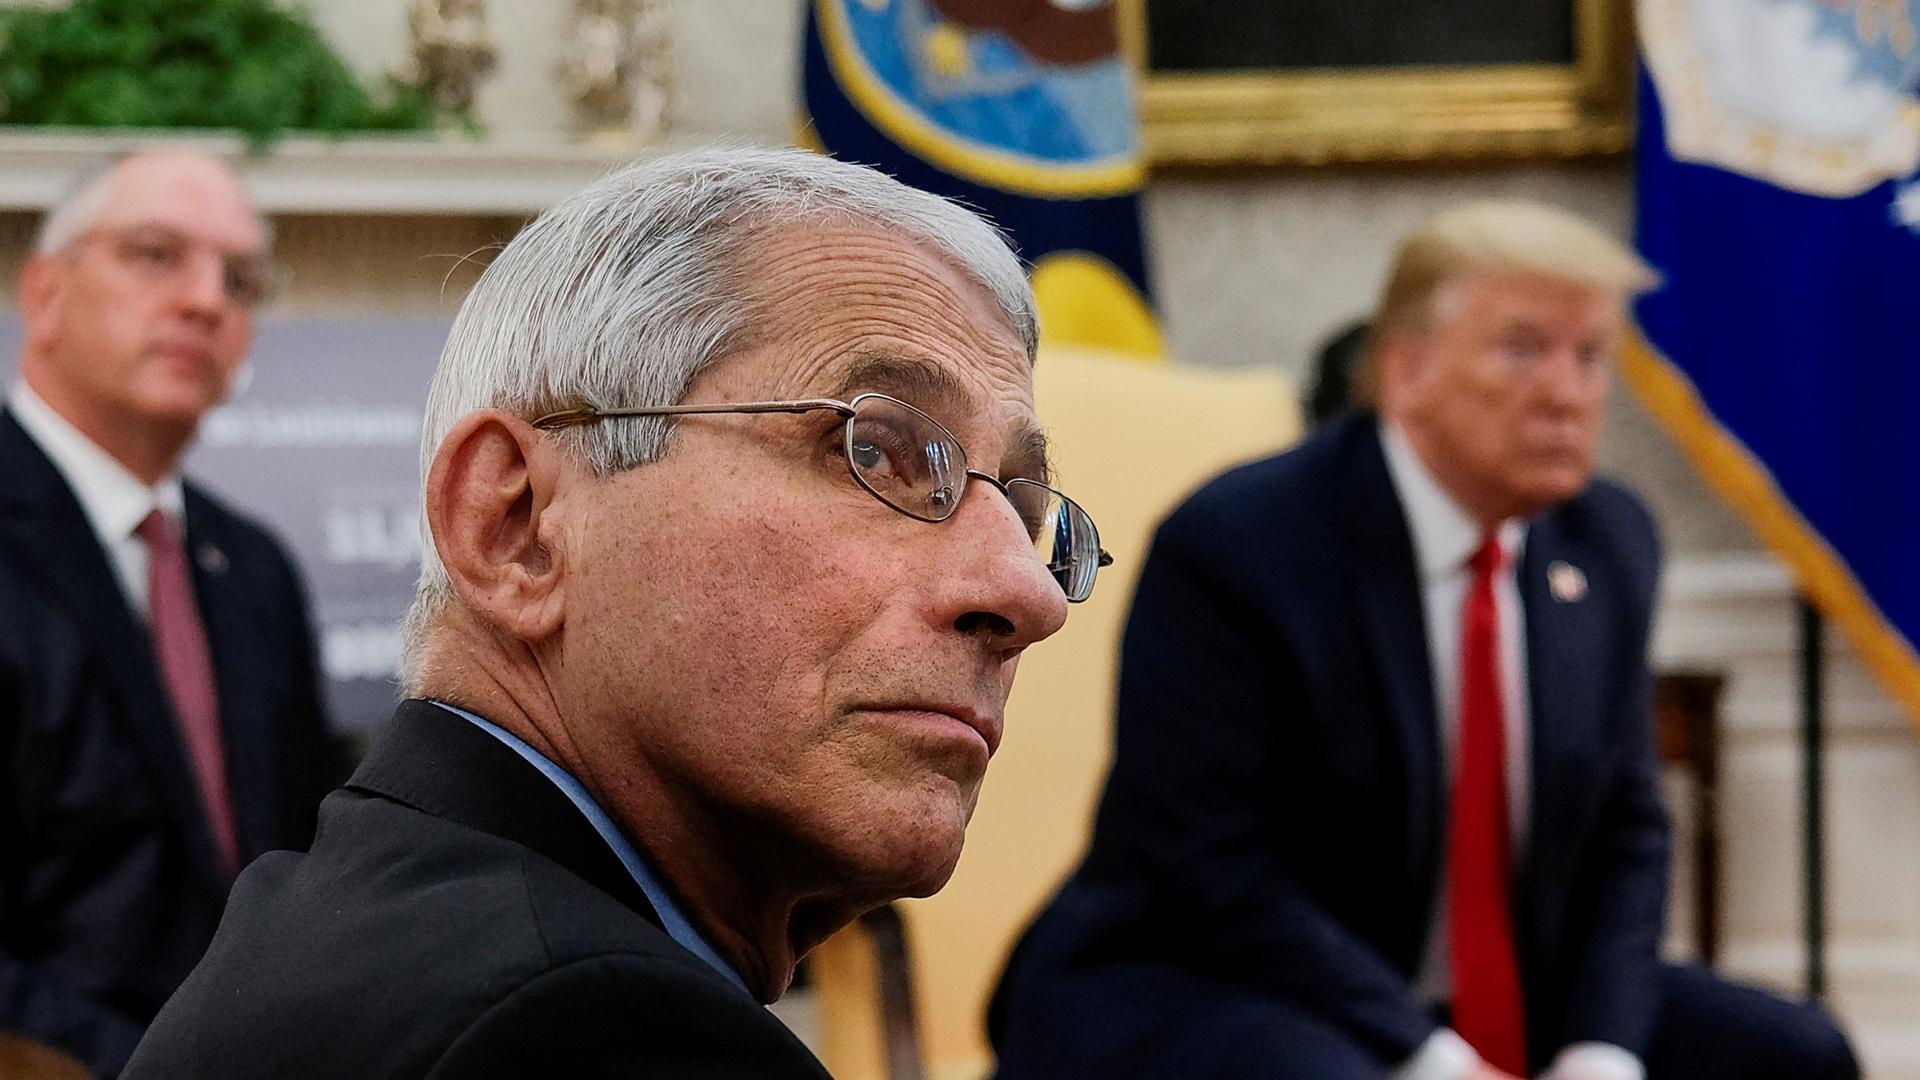 A close up photograph of Dr. Anthony Fauci who is wearing a dark suit and glasses with President Donald Trump shown in soft focus in the background.